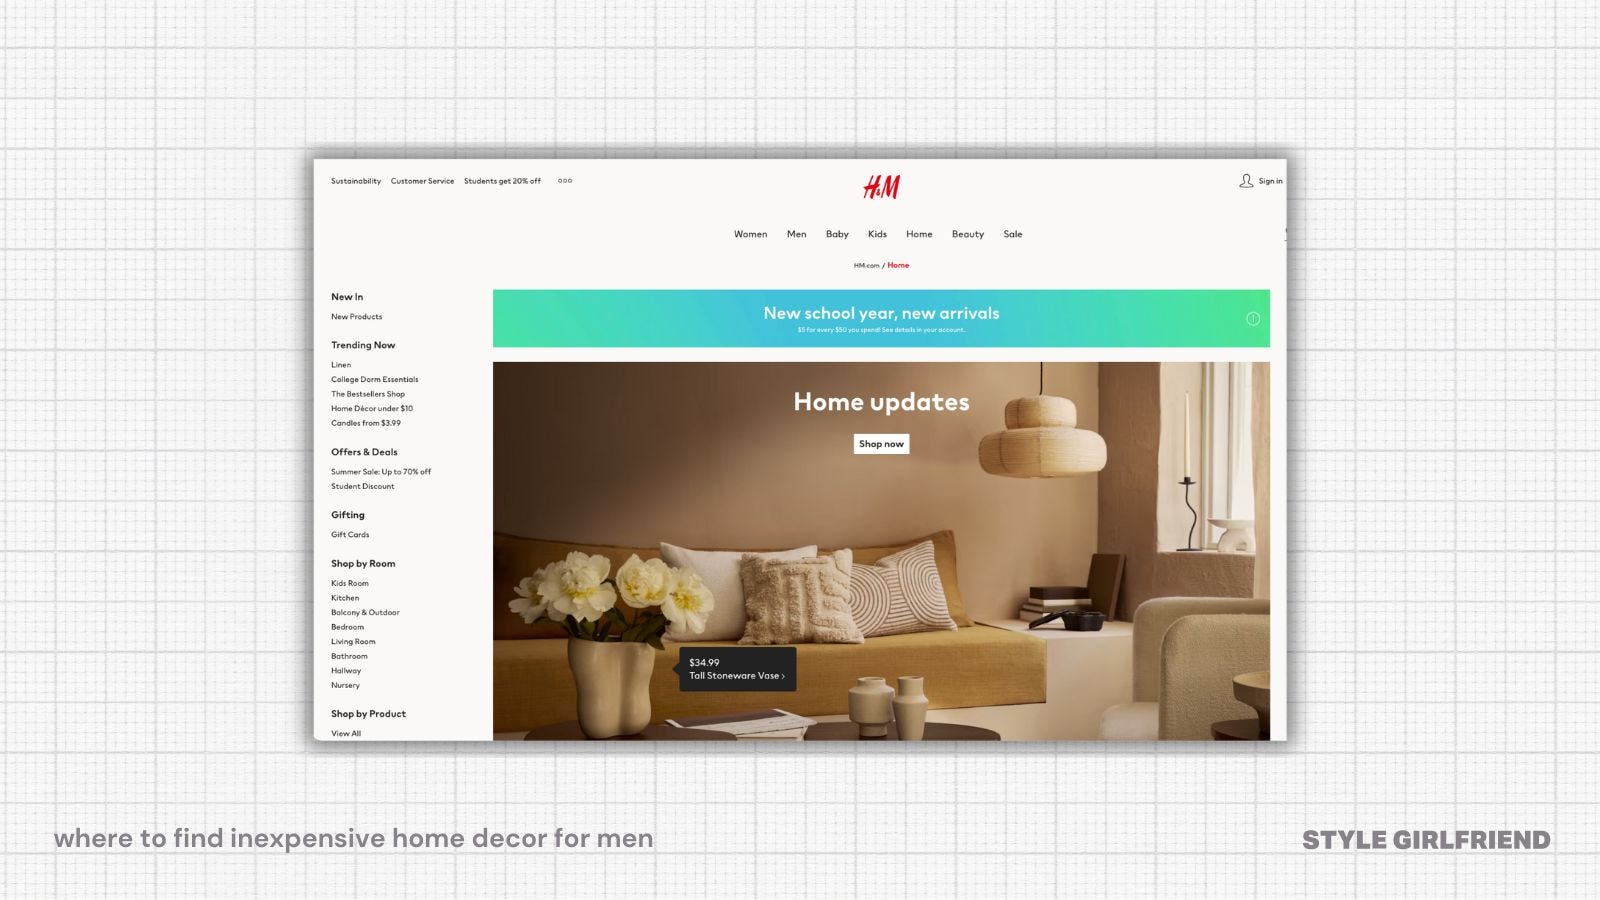 H&M home decor landing page, text on-screen reads: where to find inexpensive home decor for men (style girlfriend)